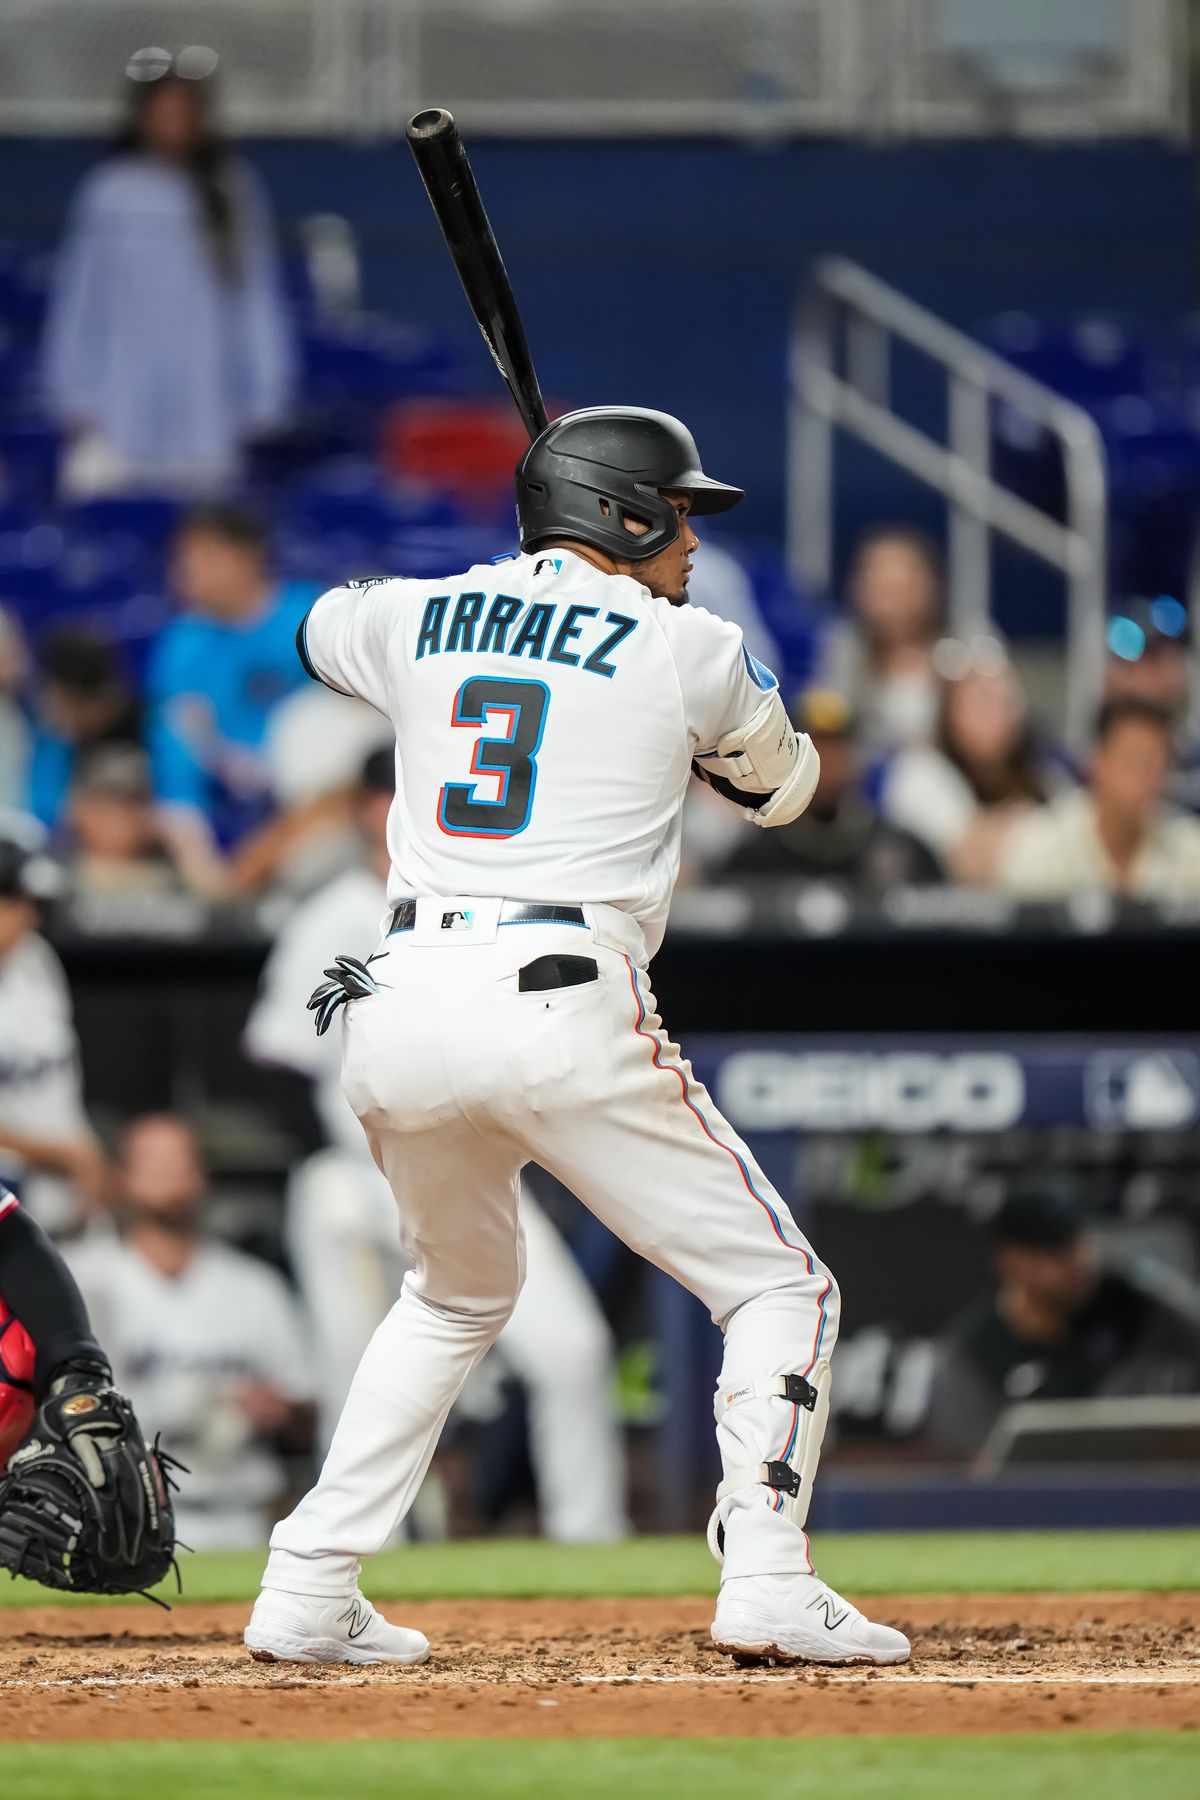 Luis Arraez #3 of the Miami Marlins bats against the Minnesota Twins on April 3, 2023 at loanDepot park in Miami, Florida.